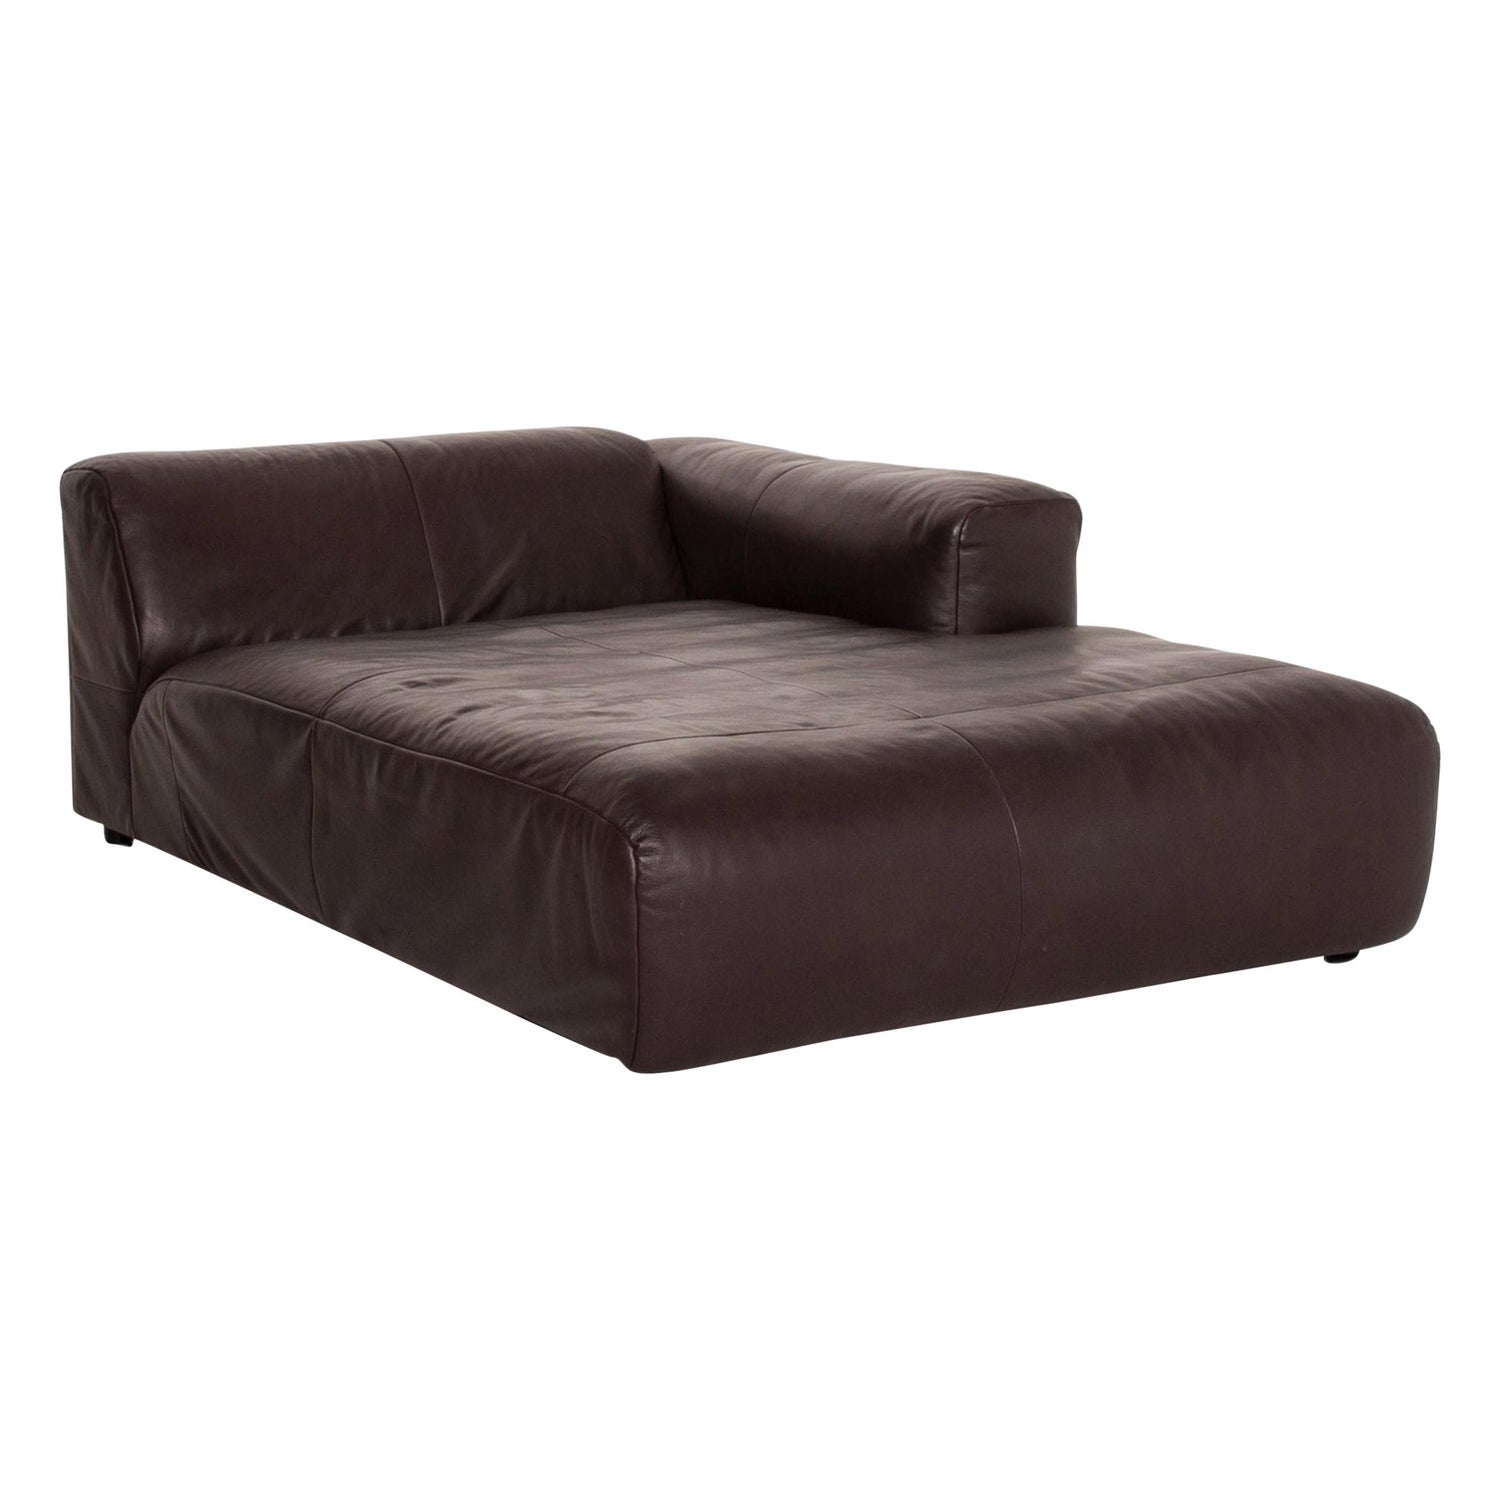 Freistil Rolf Benz 187 Leather Sofa Dark Brown Brown Two-Seat Chaise Longue  For Sale at 1stDibs | rolf benz freistil 187, freistil 187